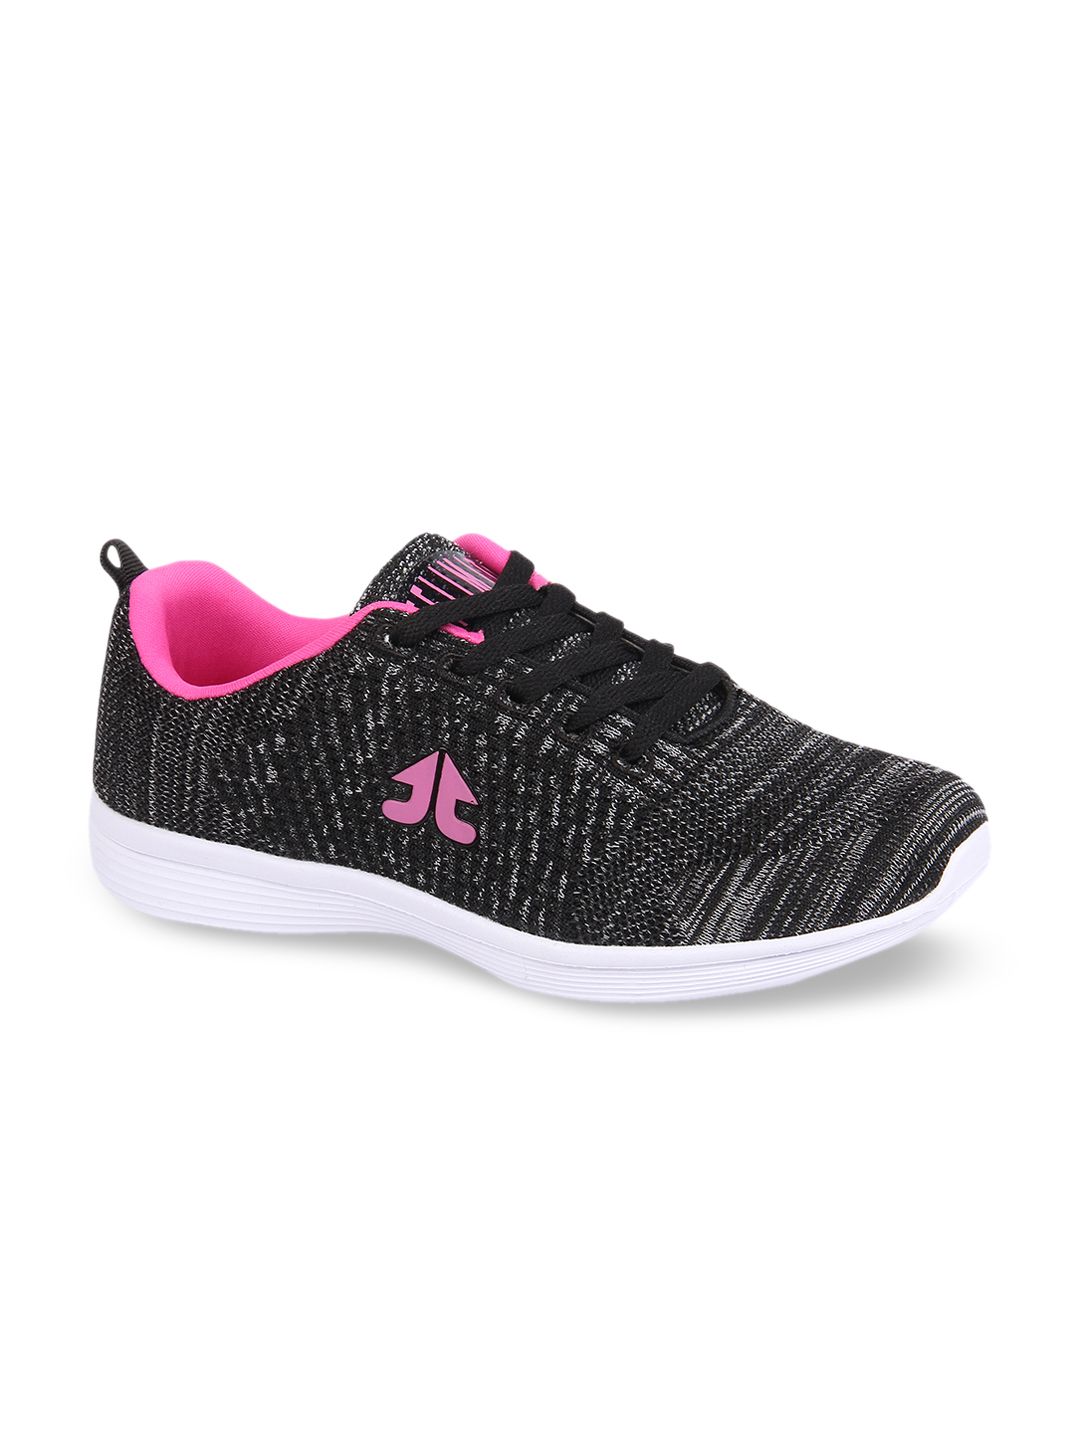 OFF LIMITS Women Black Ava Running Shoes Price in India